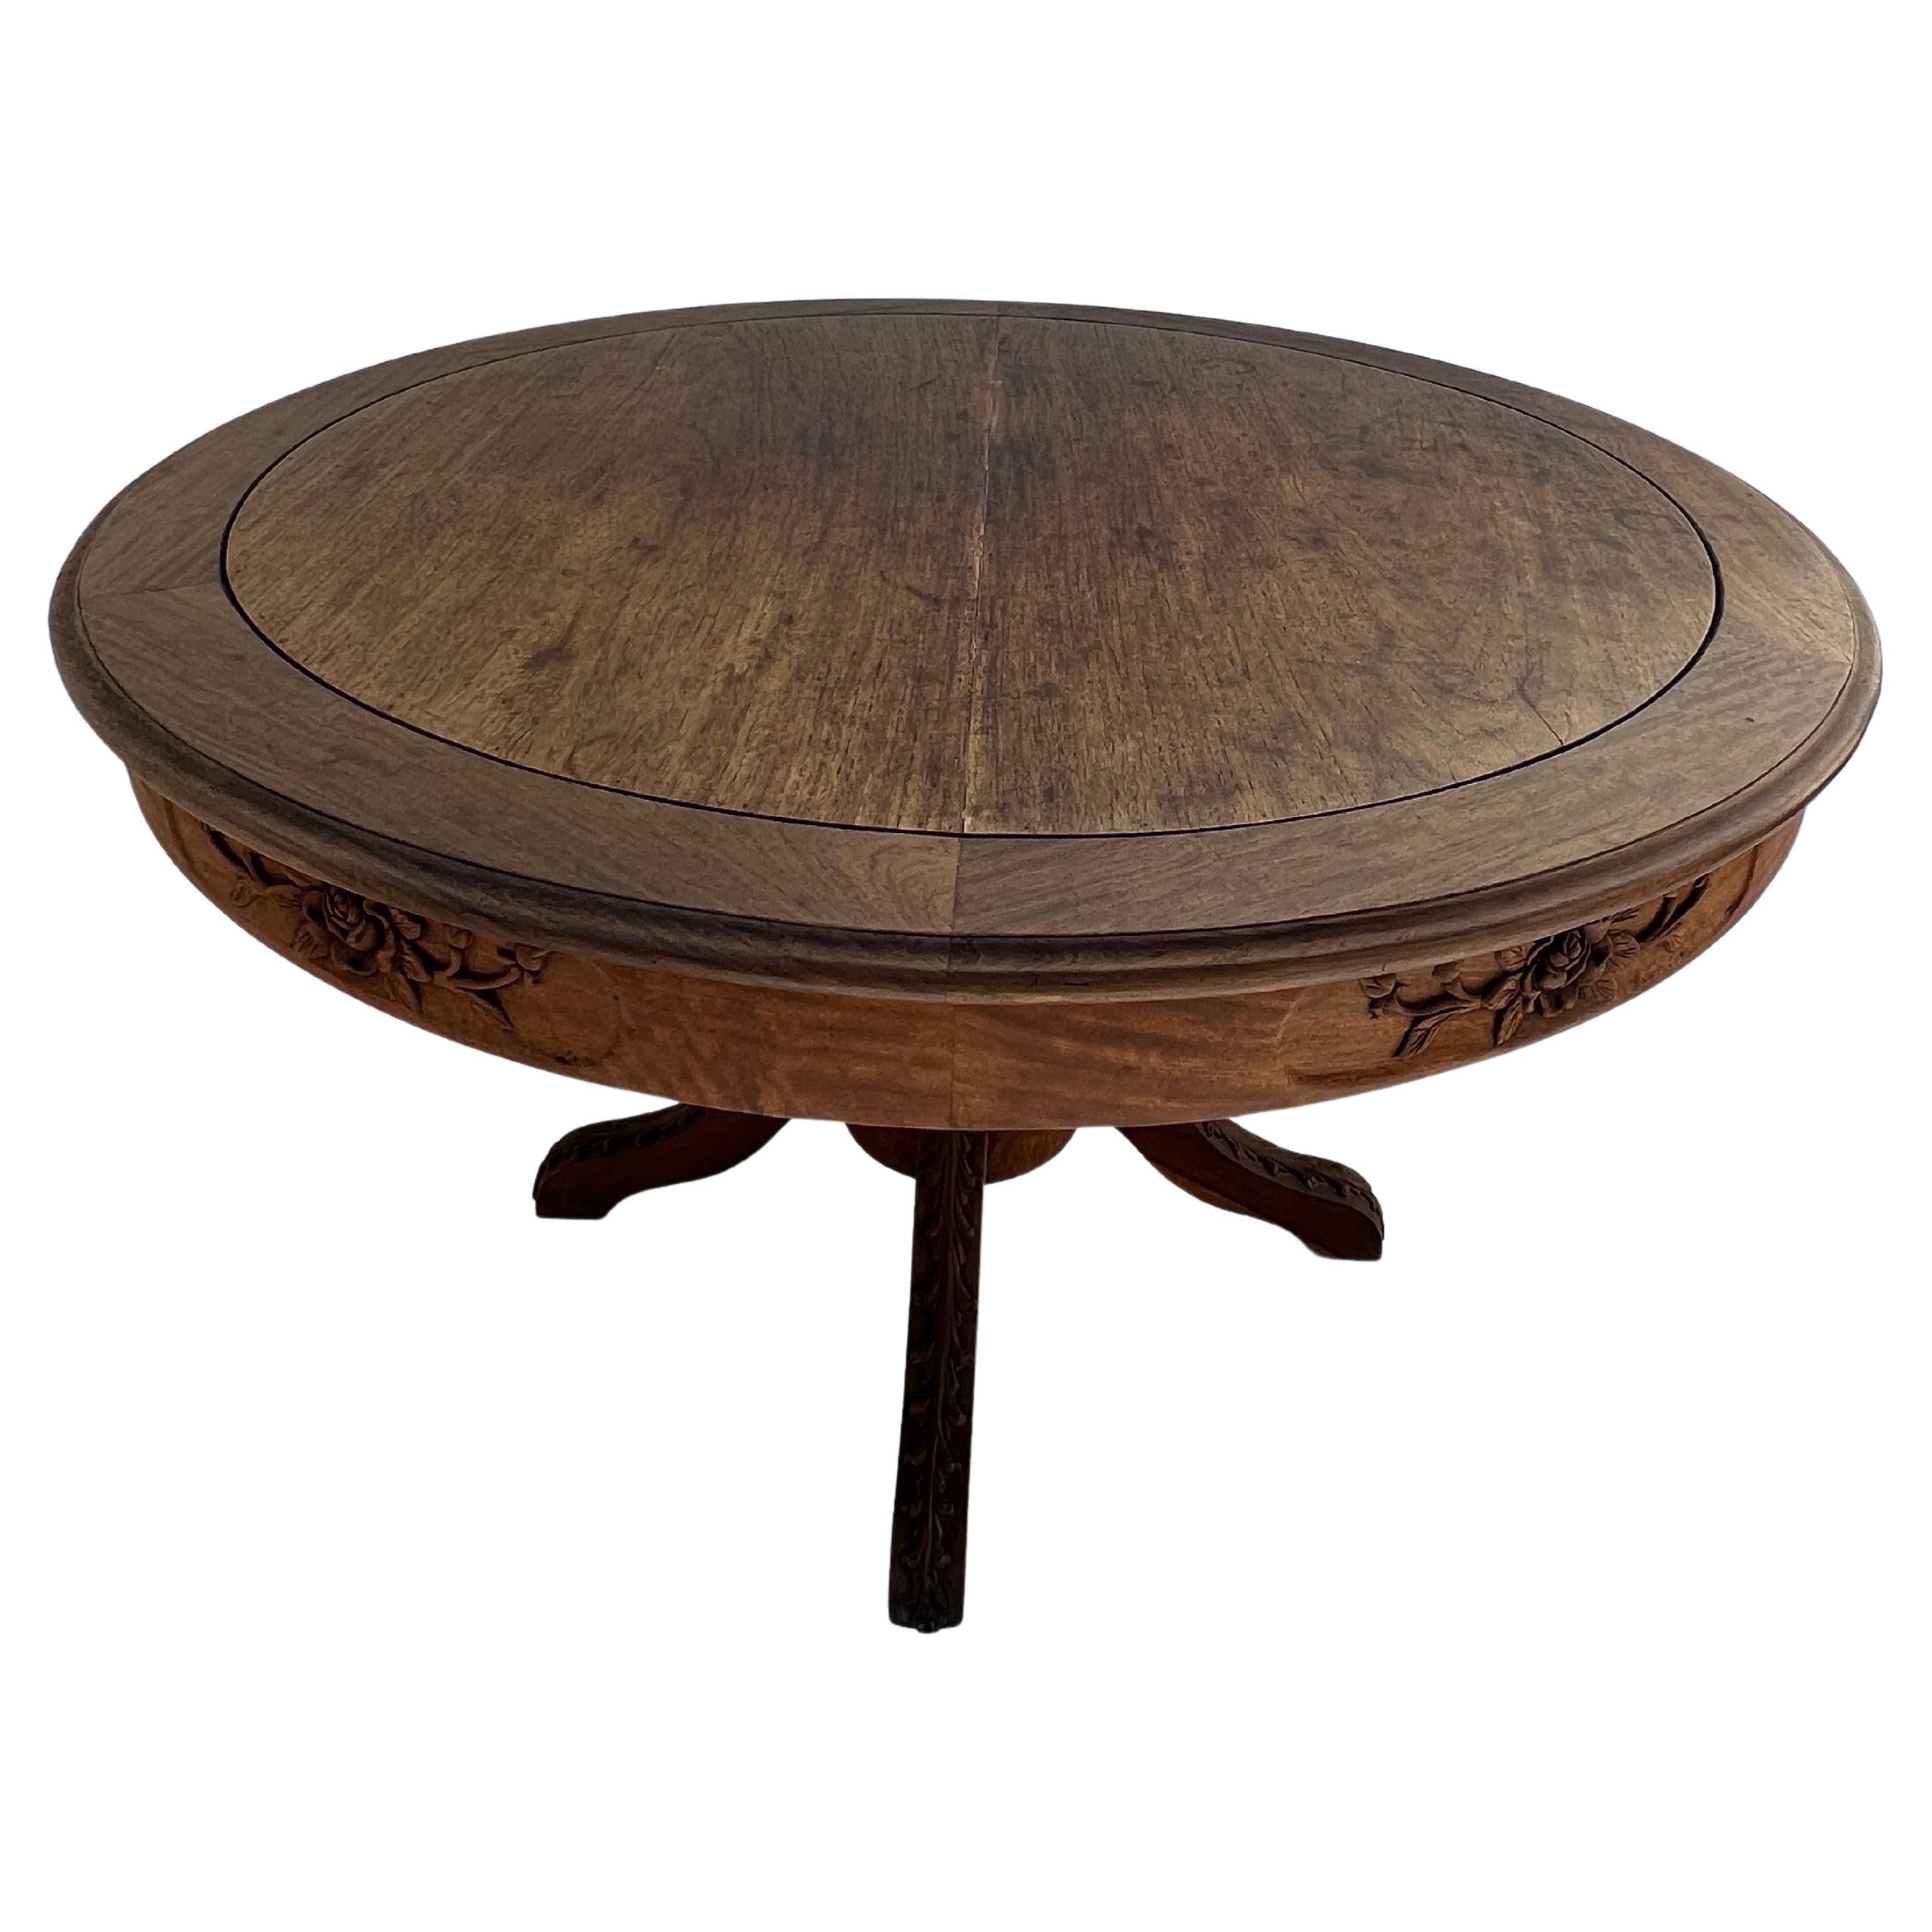 French Colonial Craved Teak Dinning Table 1930's For Sale